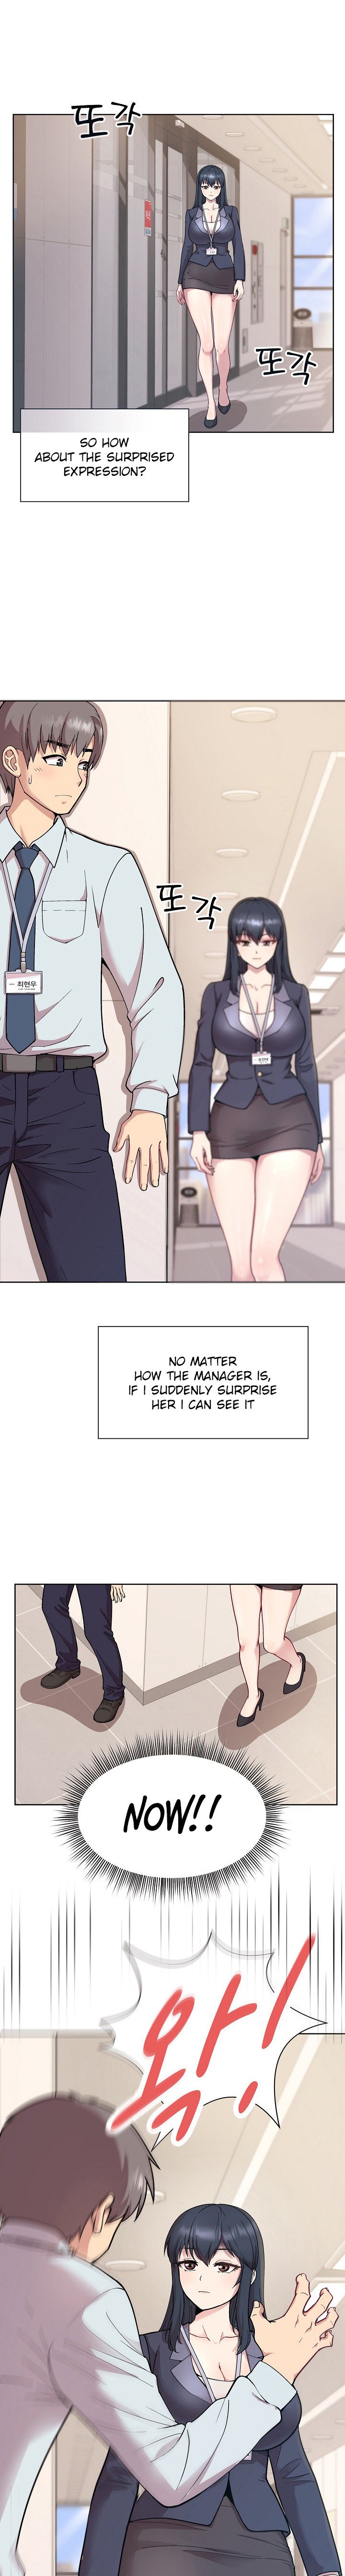 Playing a game with my Busty Manager - Chapter 1 Page 7